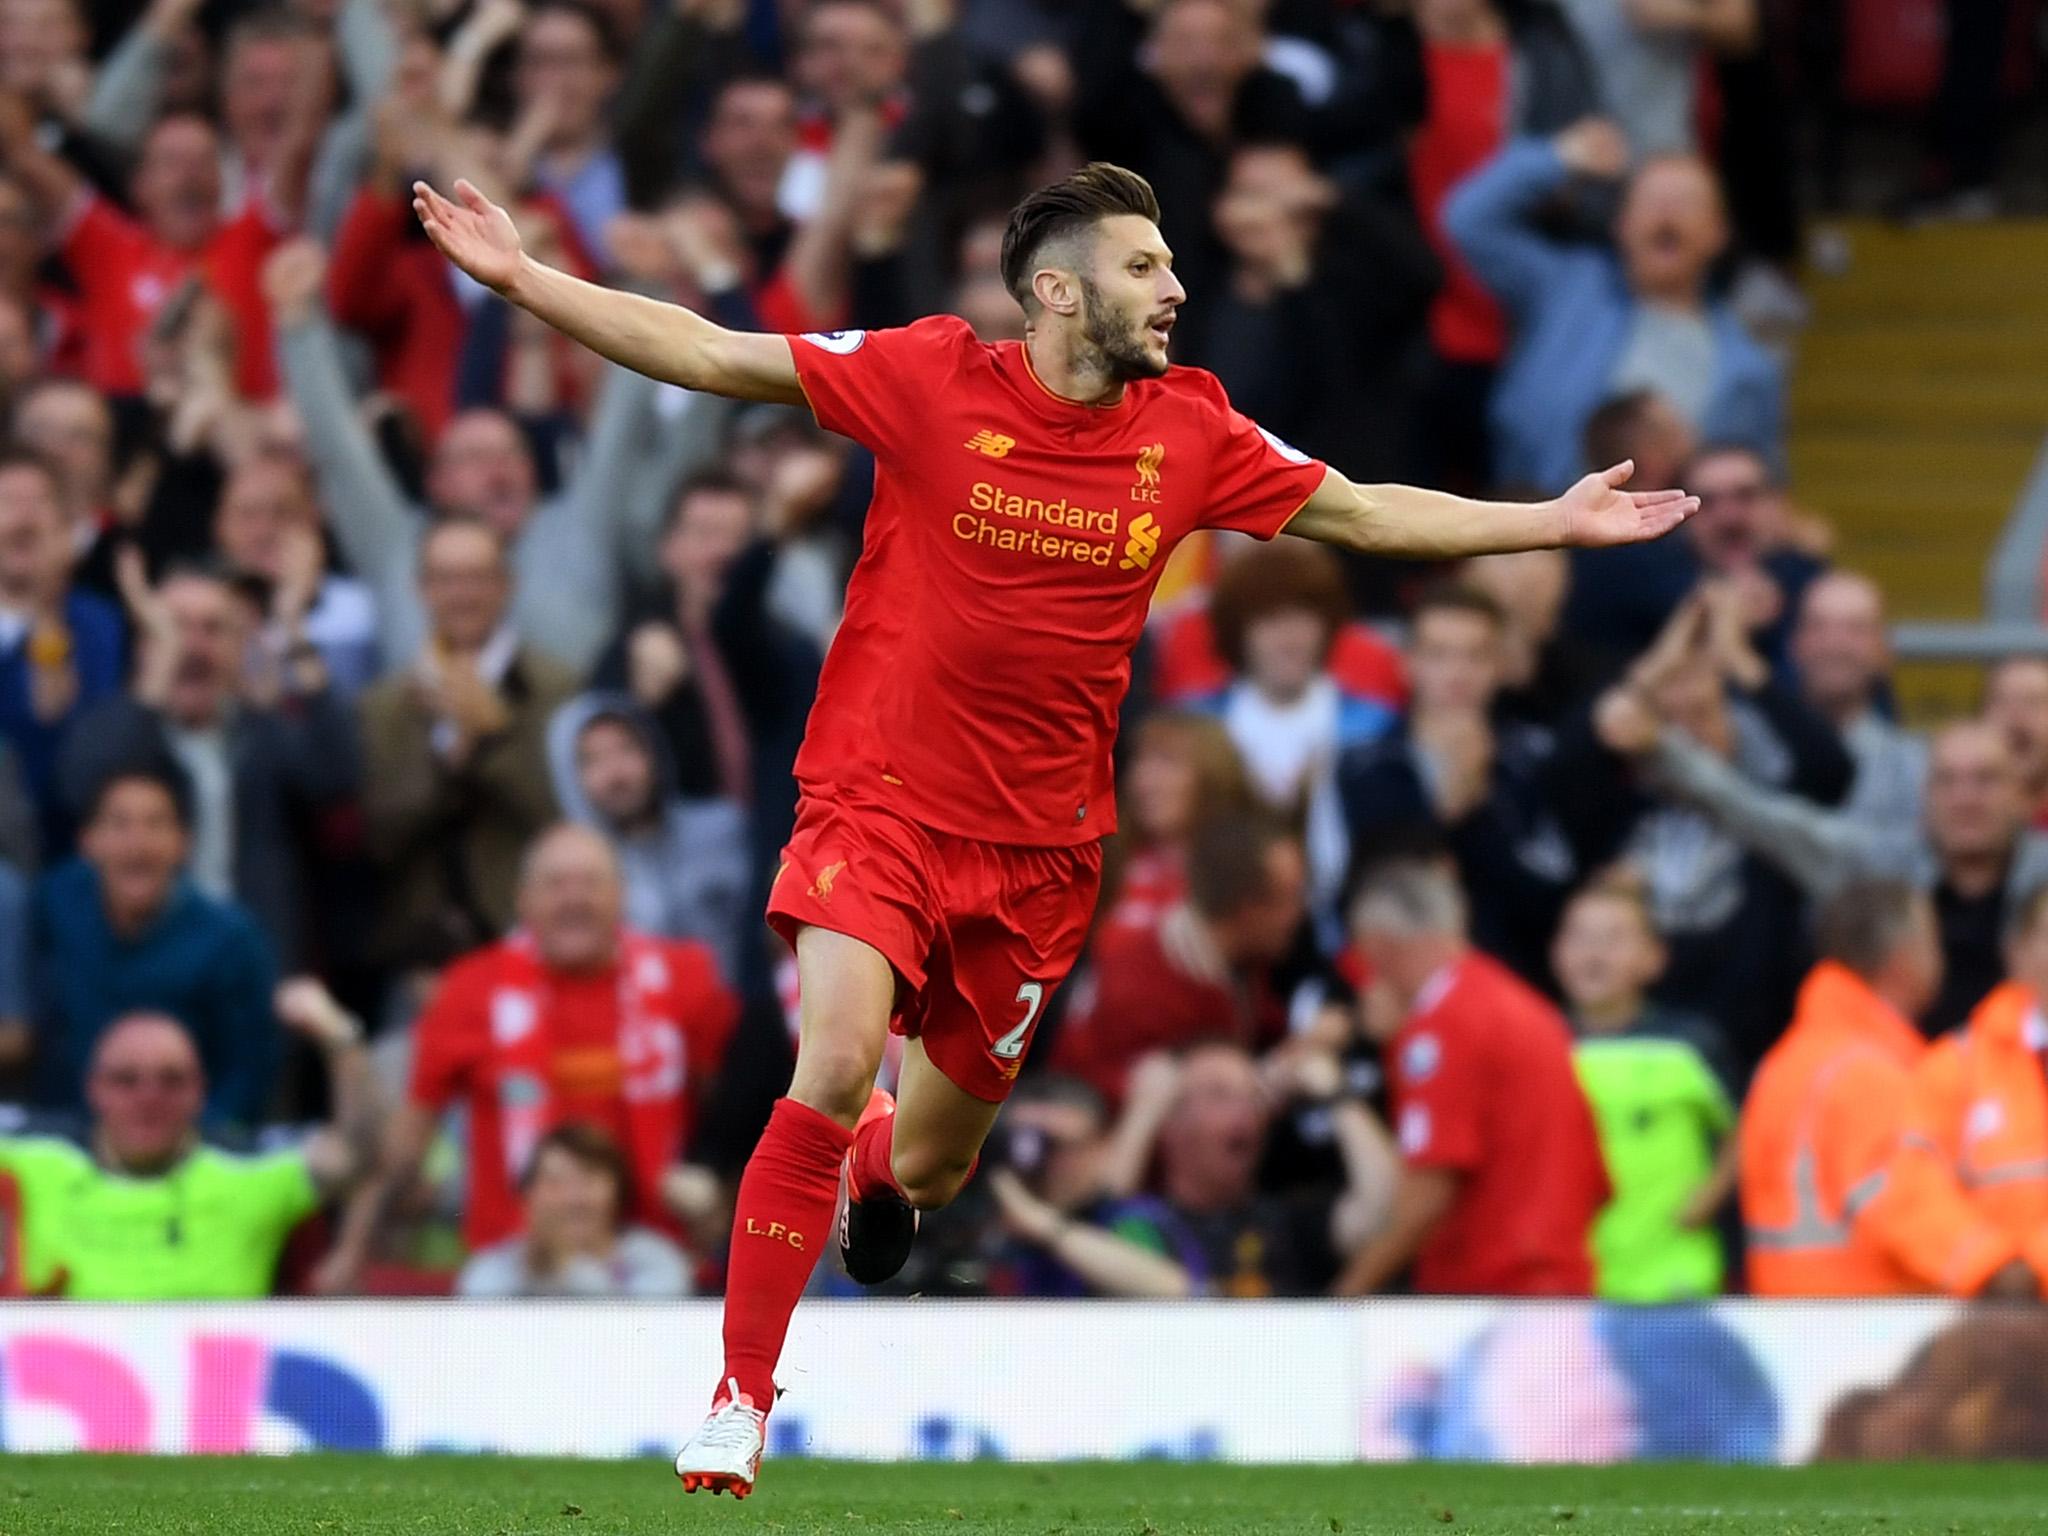 Lallana has already scored two goals this season for the Reds